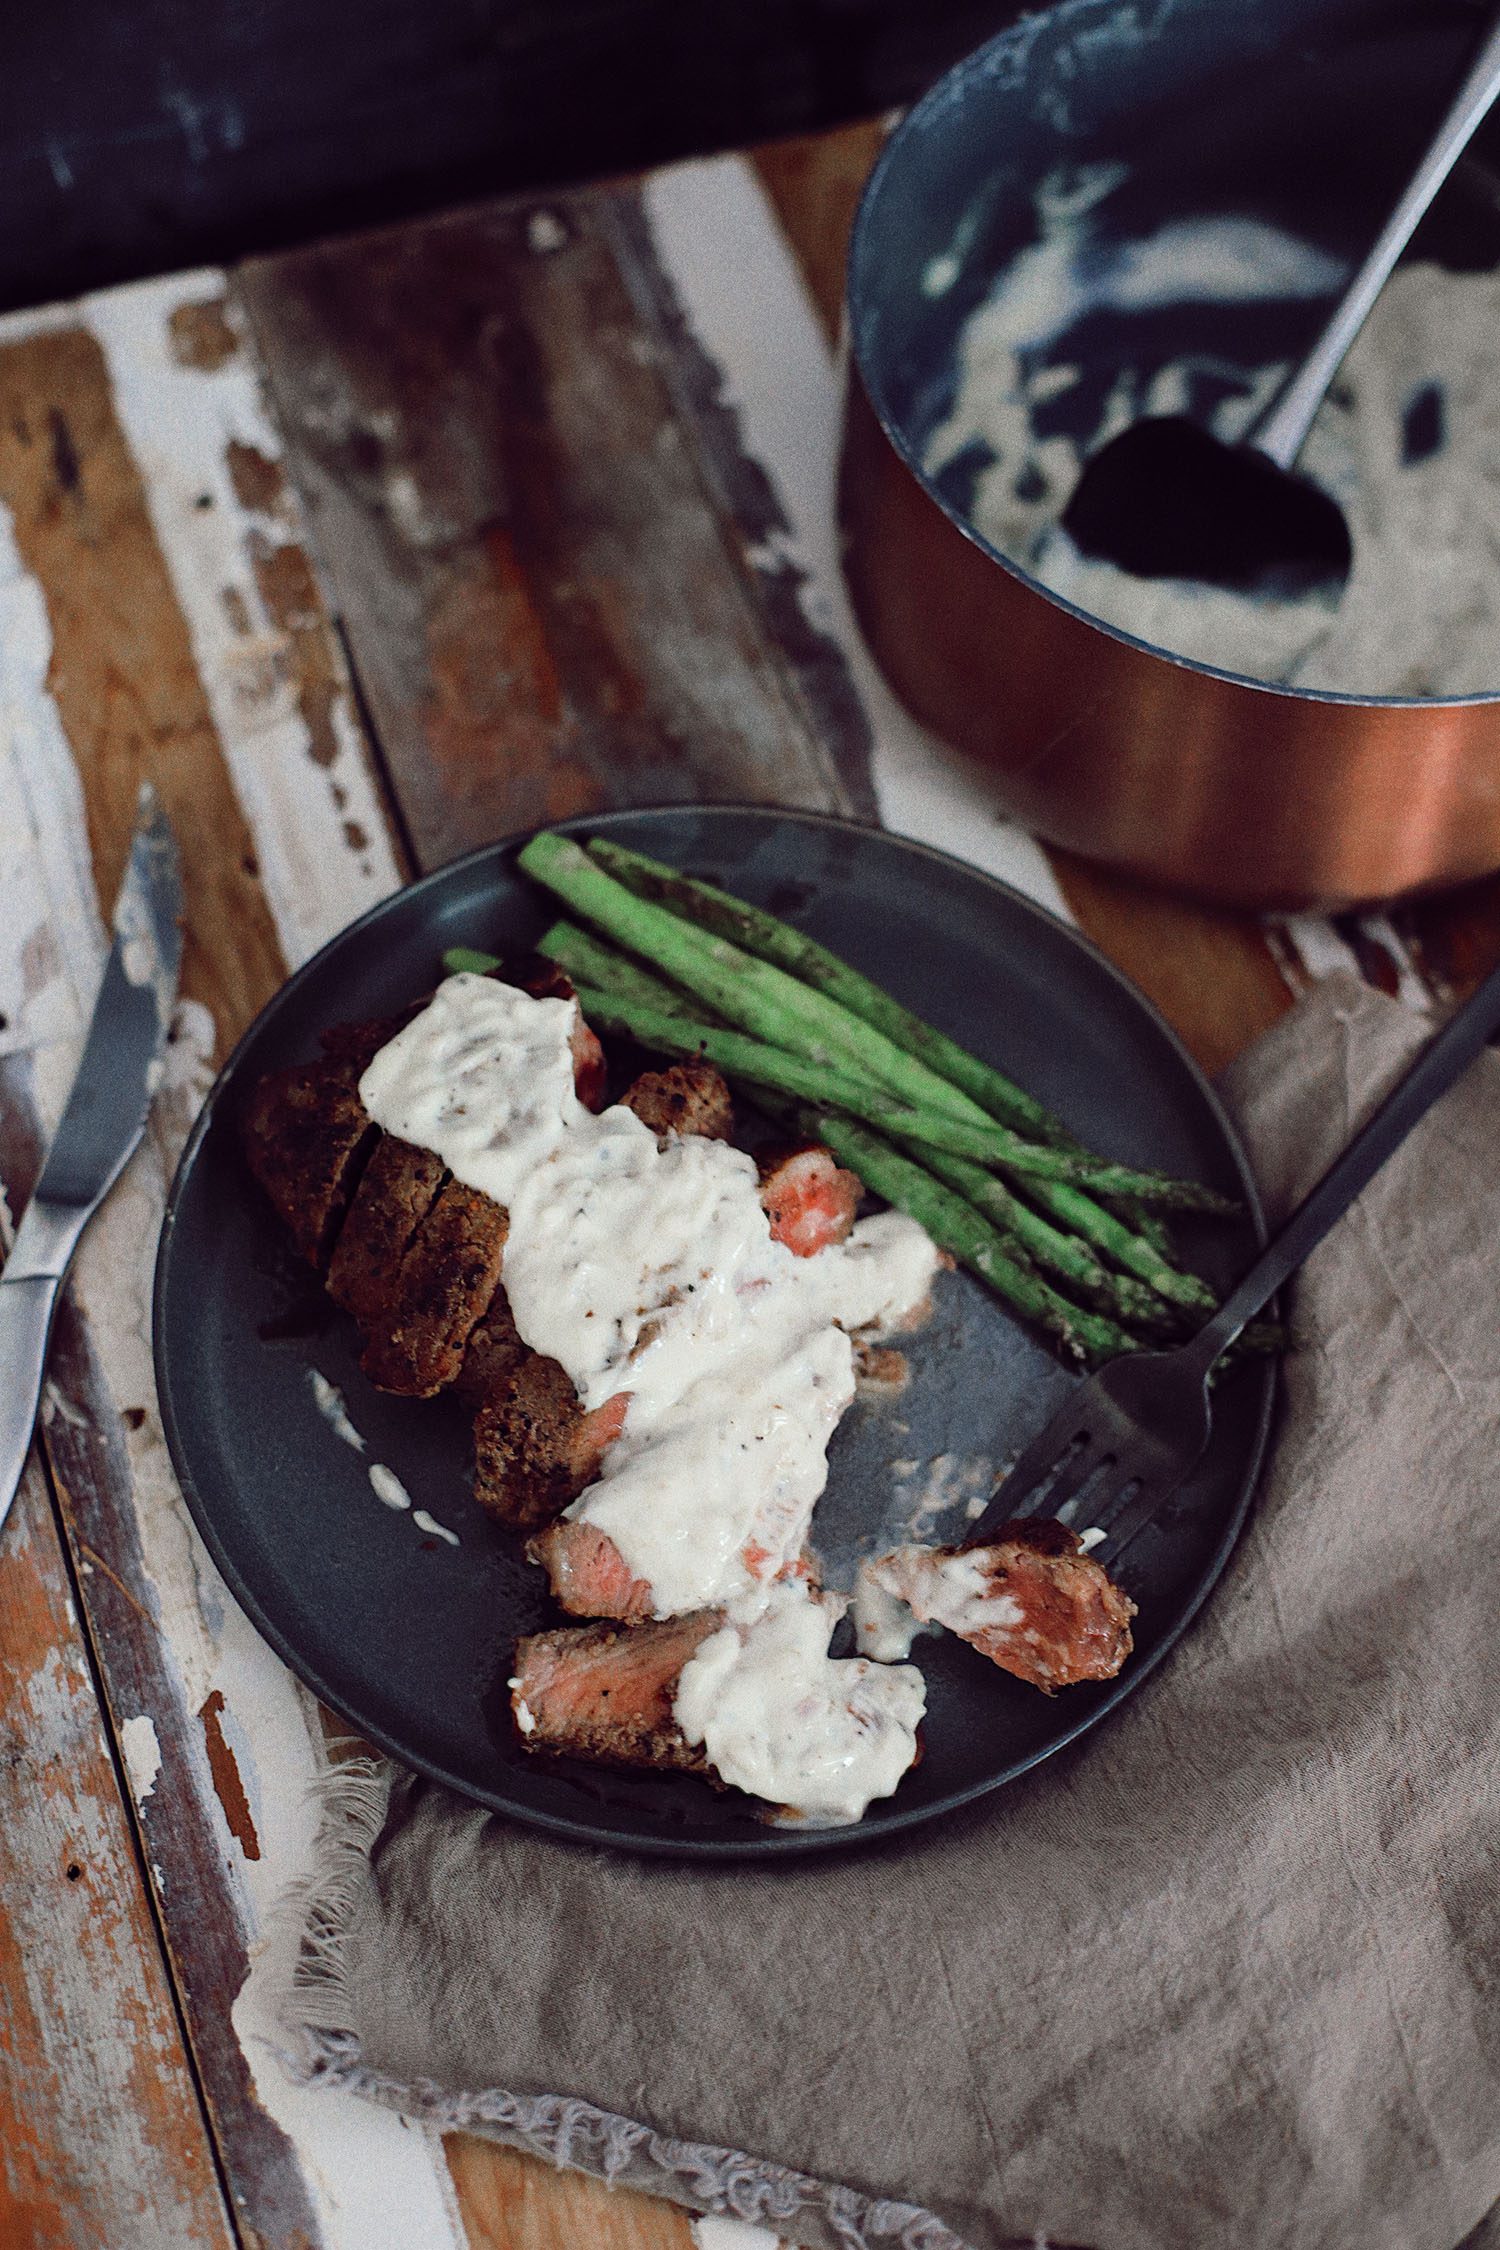 Pan-Seared Steak with Gorgonzola Sauce! Perfect for a date night at home. Check out all of our valentines dinner ideas!